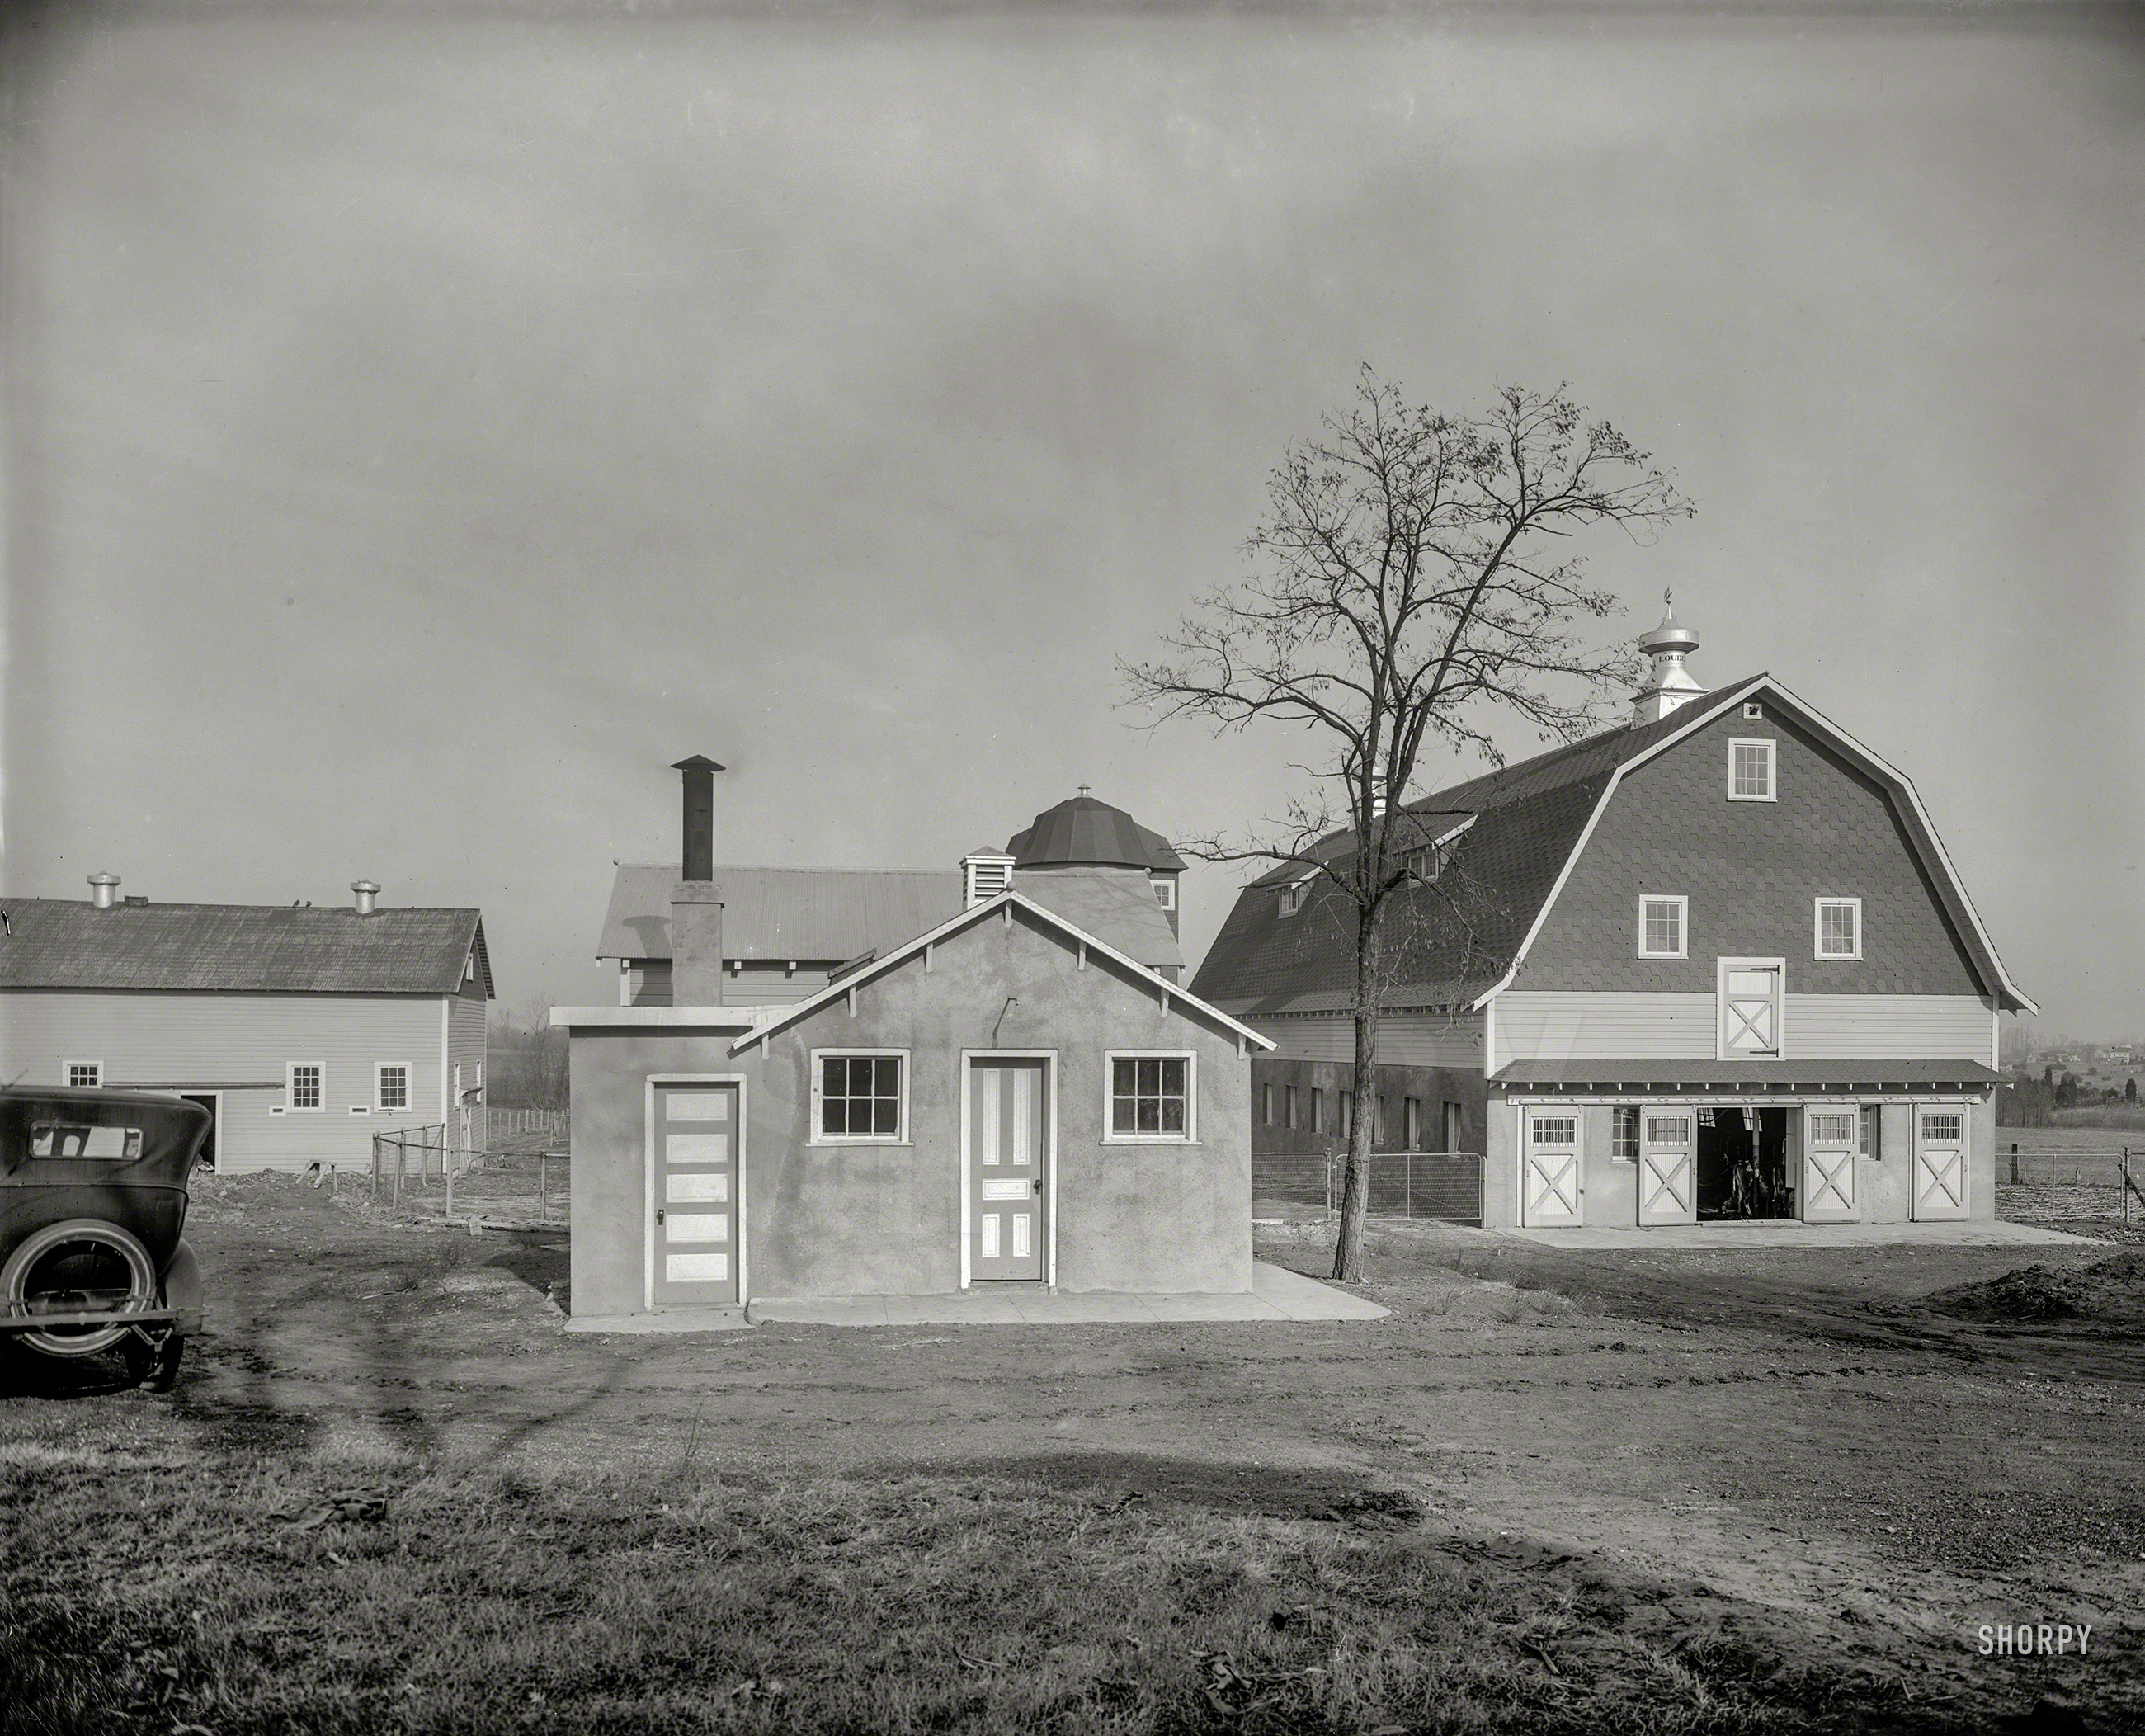 Circa 1925. "Chestnut Farms Sanitary Dairy." The cows were pastured somewhere near Philadelphia, their milk processed at George Oyster's dairy plant on Connecticut Avenue in Washington. 8x10 inch glass negative. View full size.